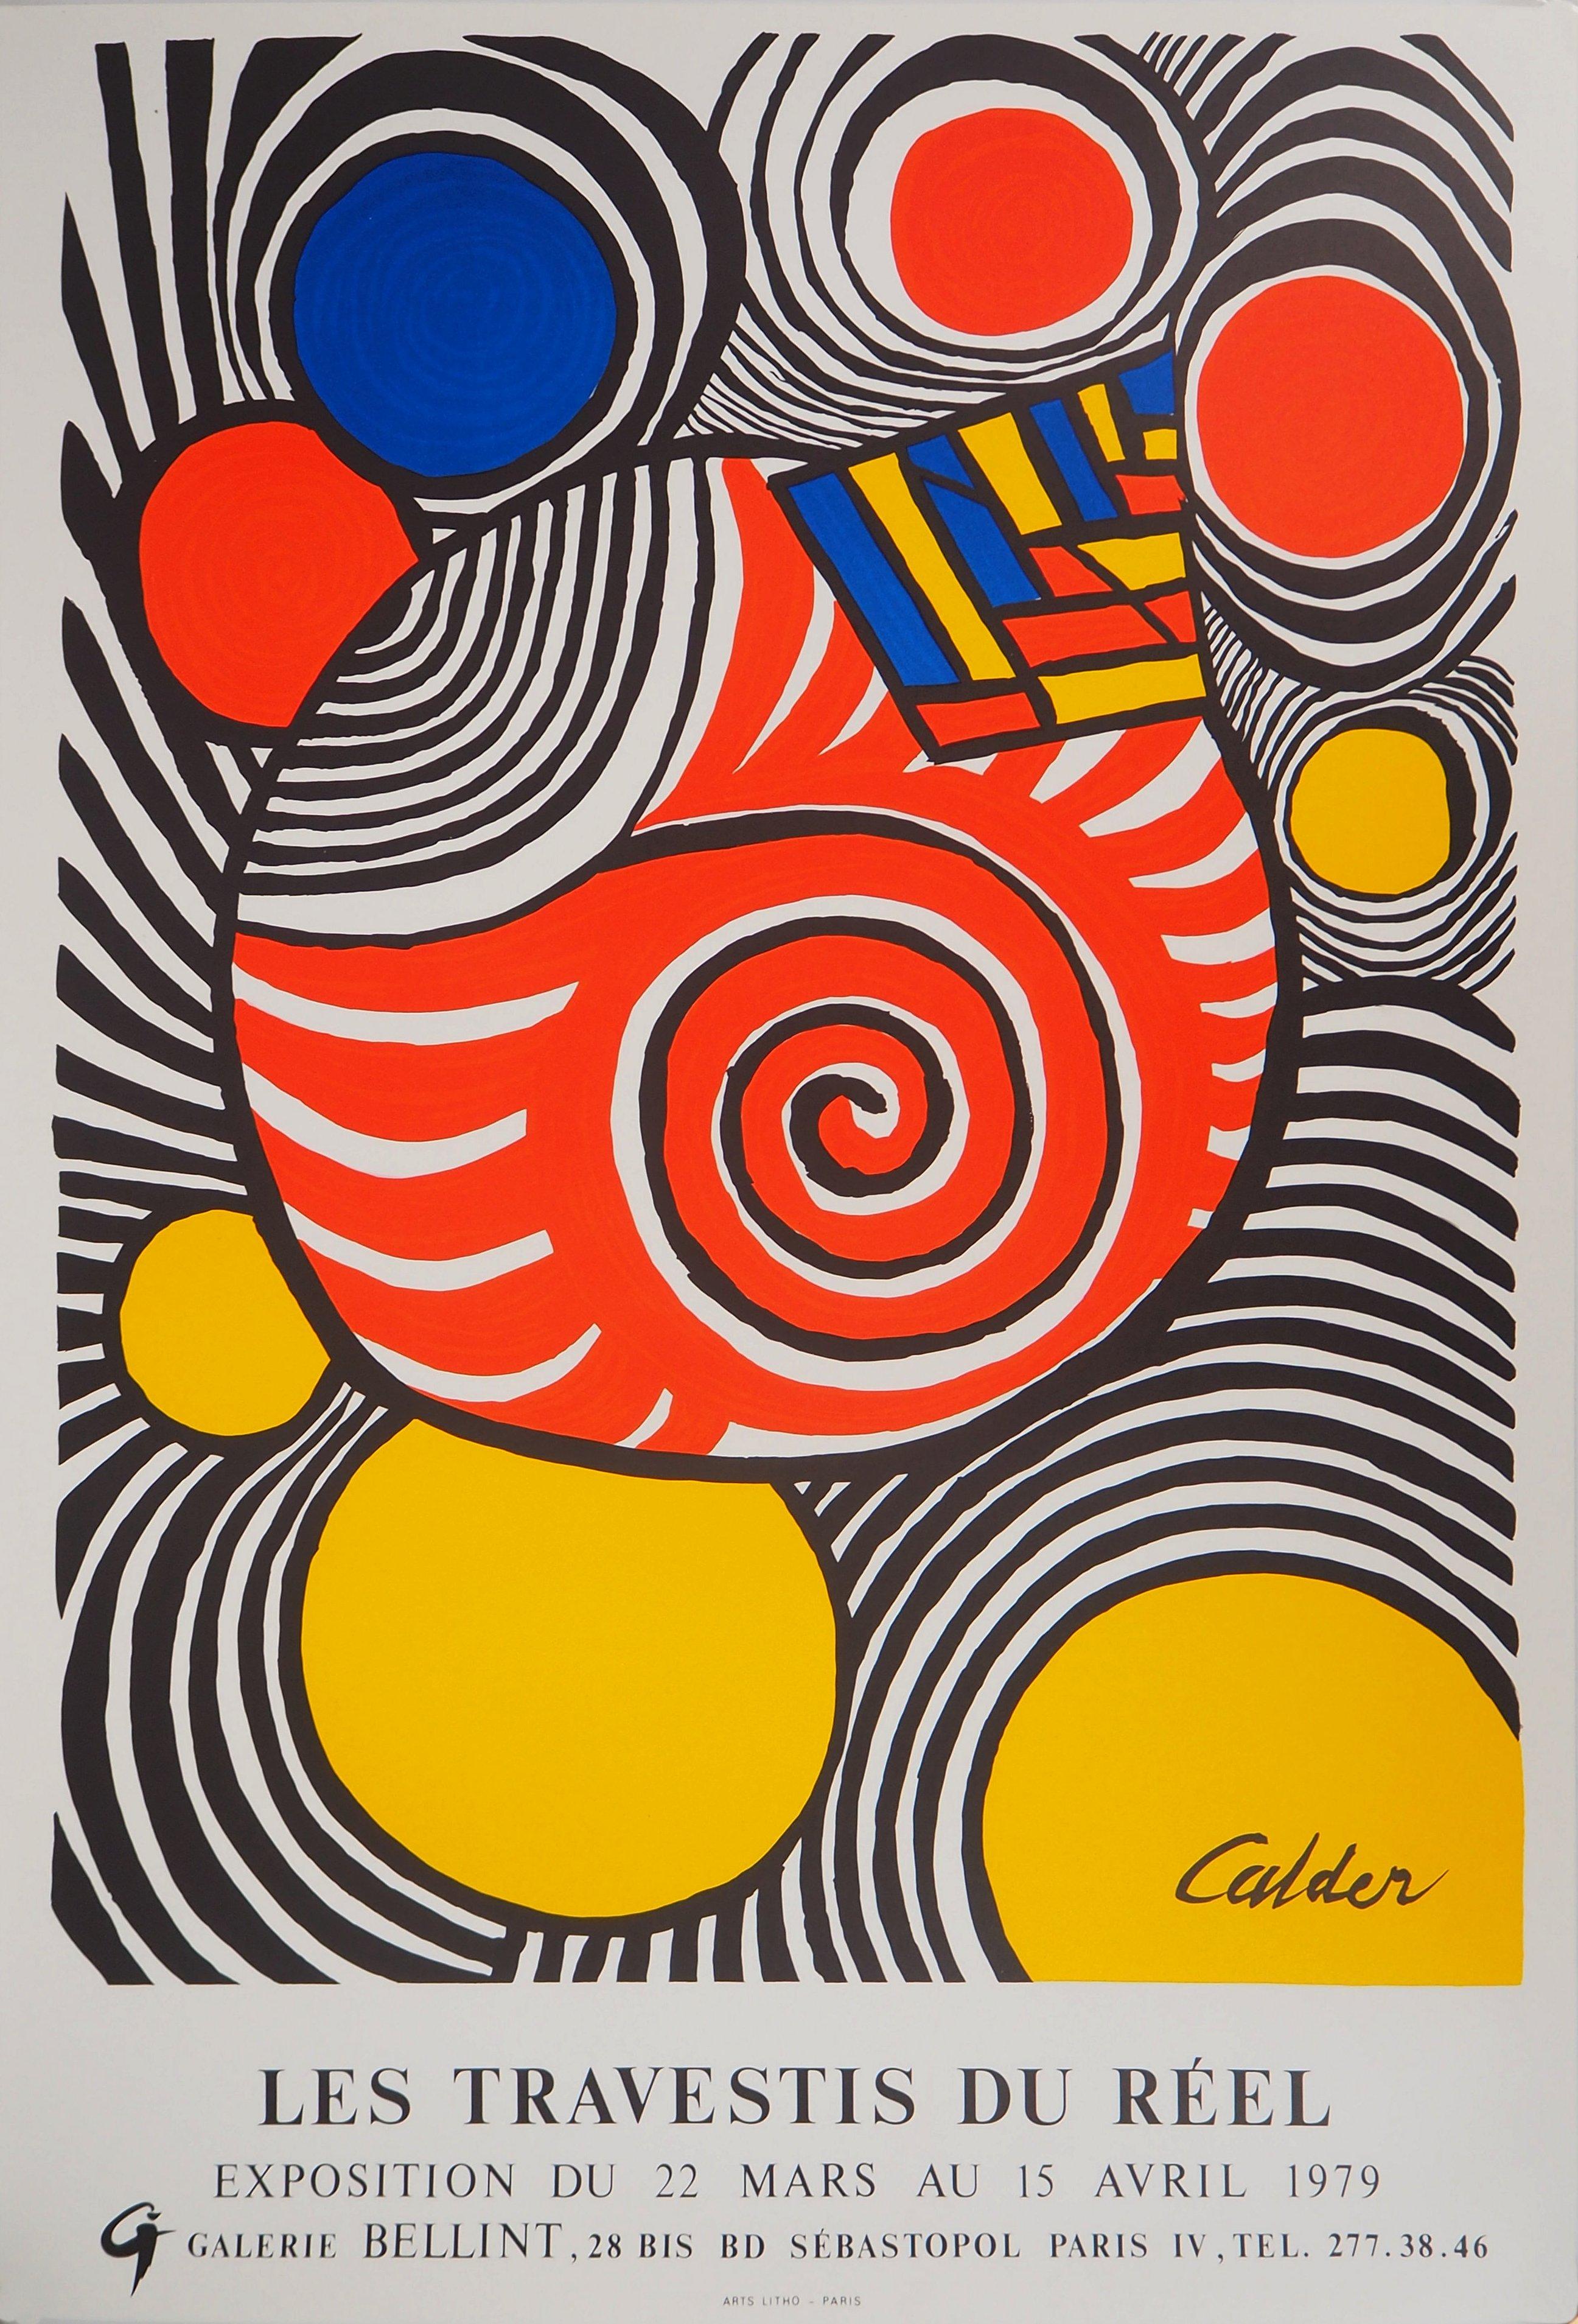 Alexander Calder Abstract Print - Color Balloons and Waves (Les Travestis du Reel) - Lithograph poster - 1979